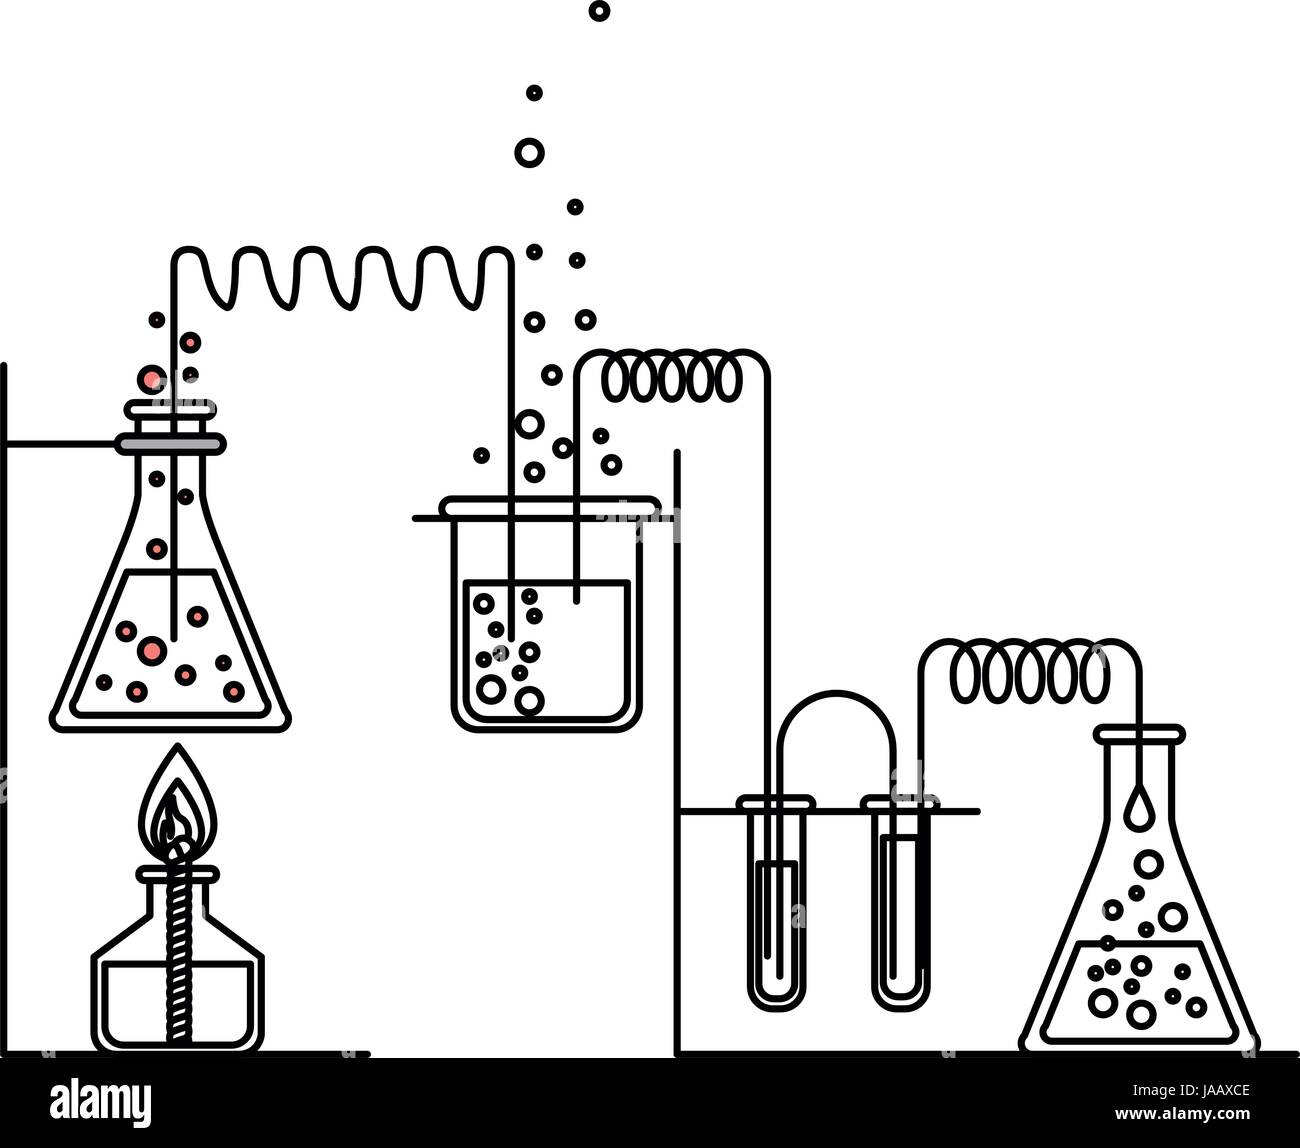 Sketch Chemical Experiment Working Little People Stock Vector (Royalty  Free) 1266225403 | Shutterstock